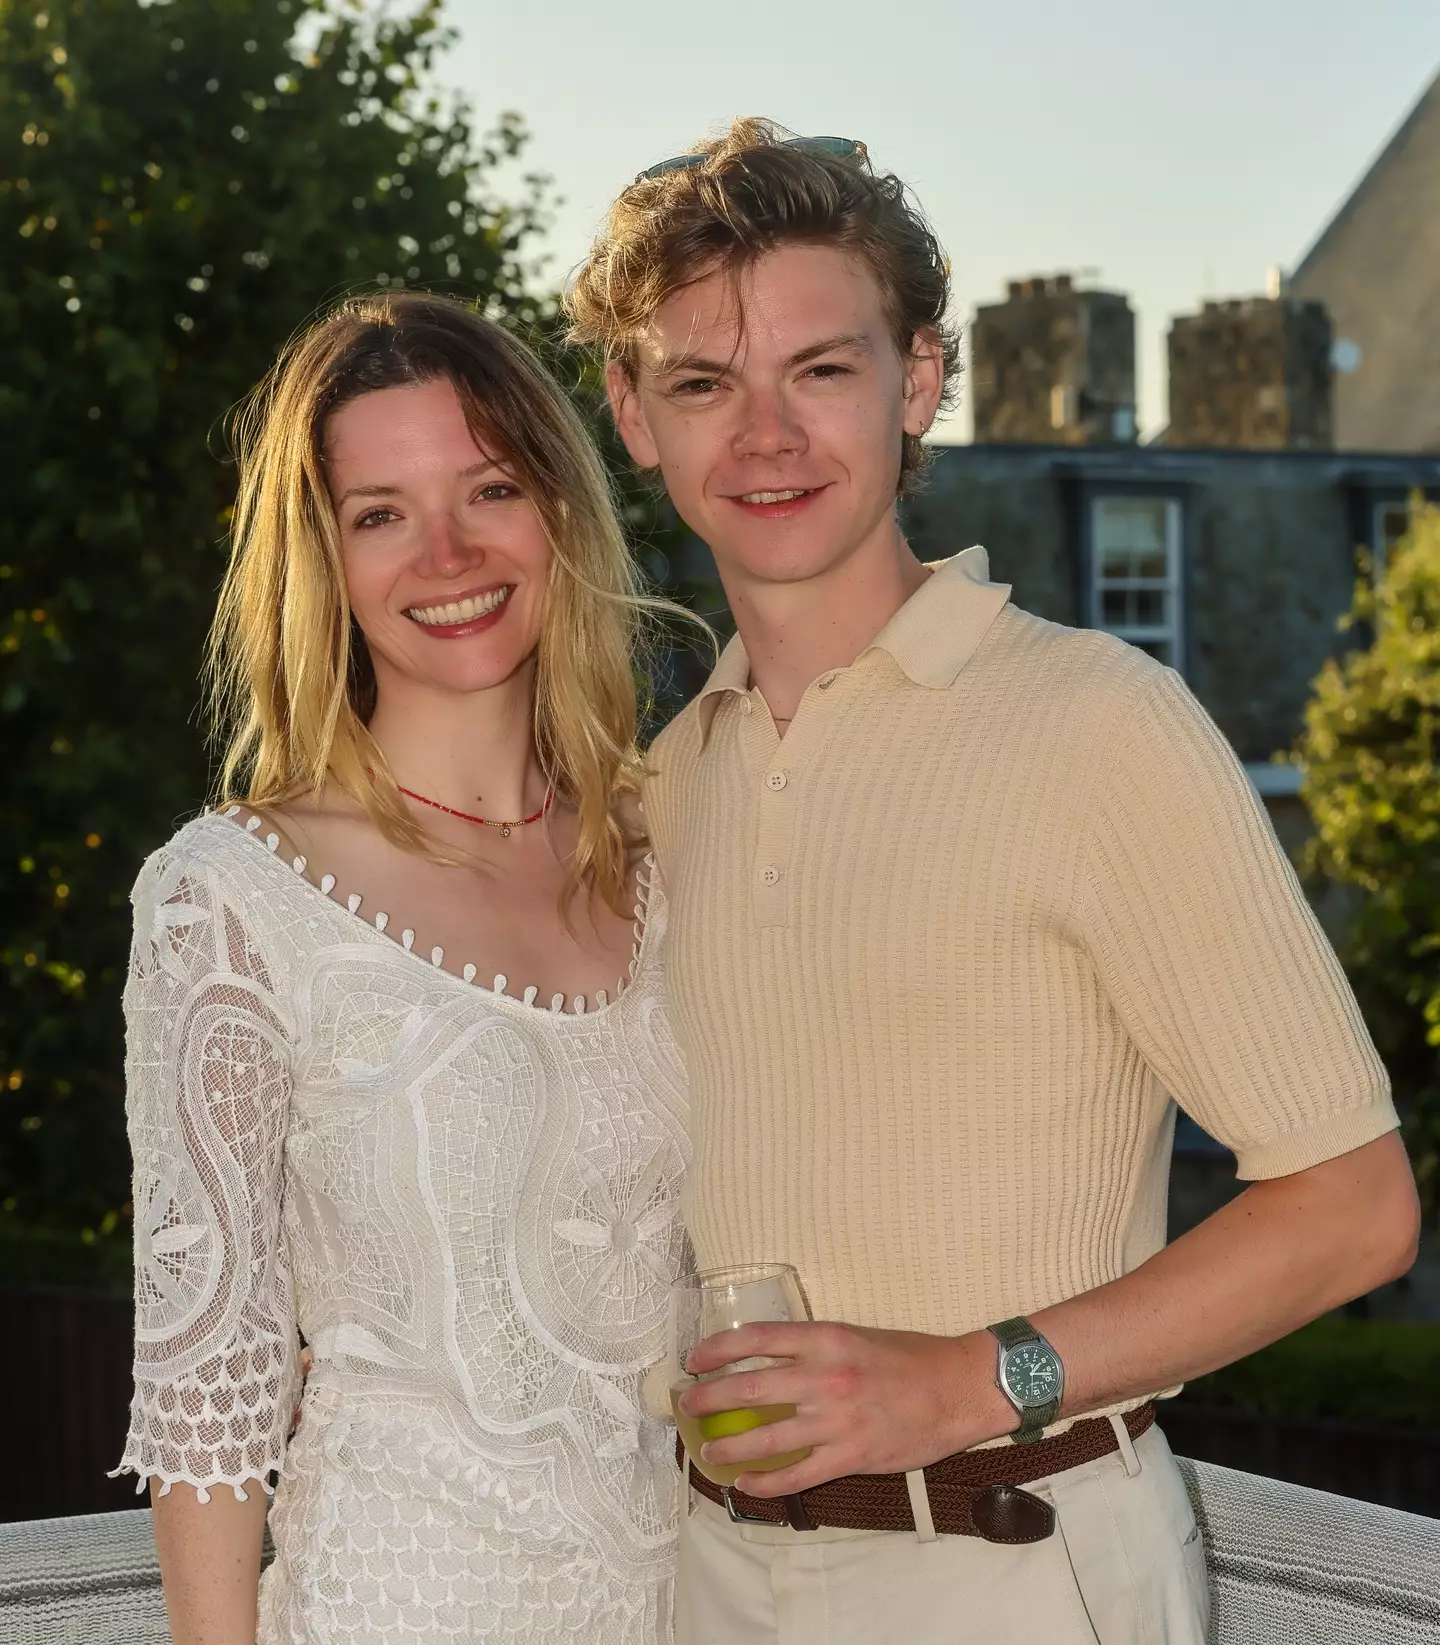 Thomas Brodie-Sangster and Talulah Riley.